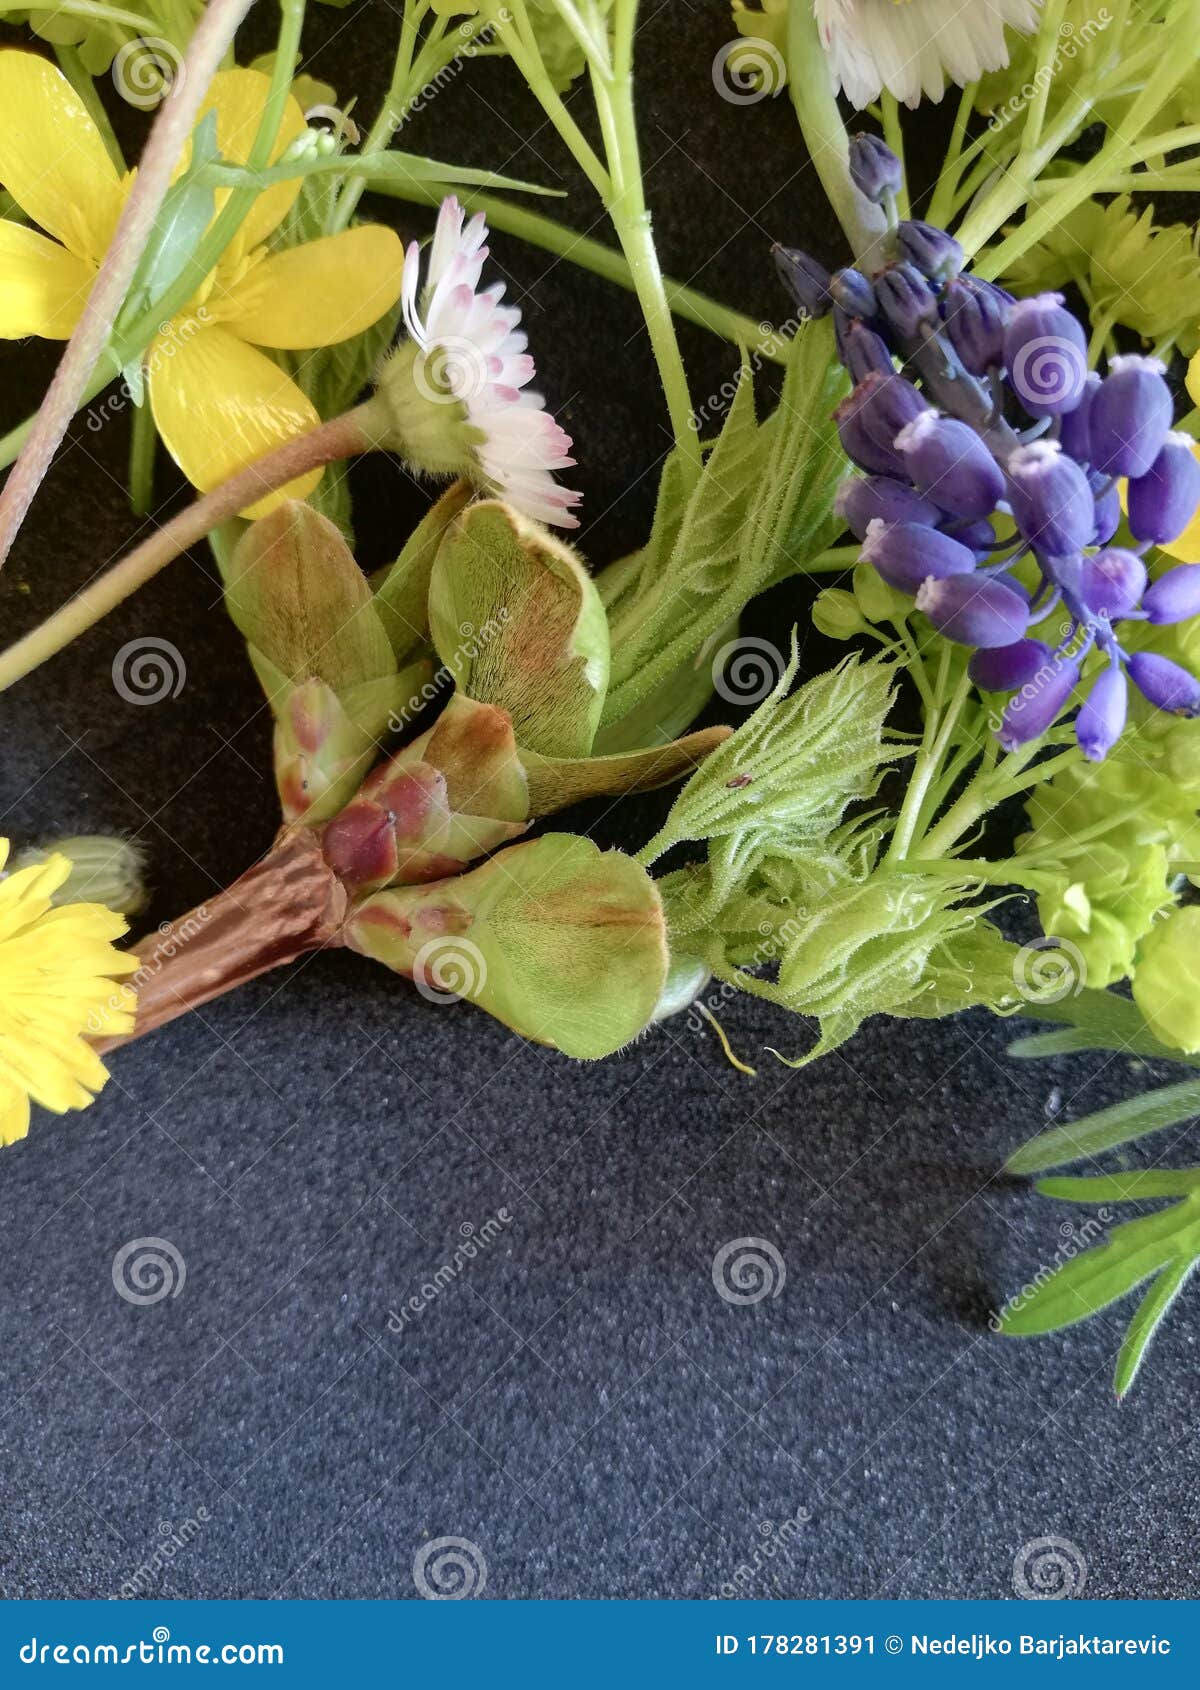 a bouquet of wild flowers yellow, white, purple, blue on a gray-black background spring flowers